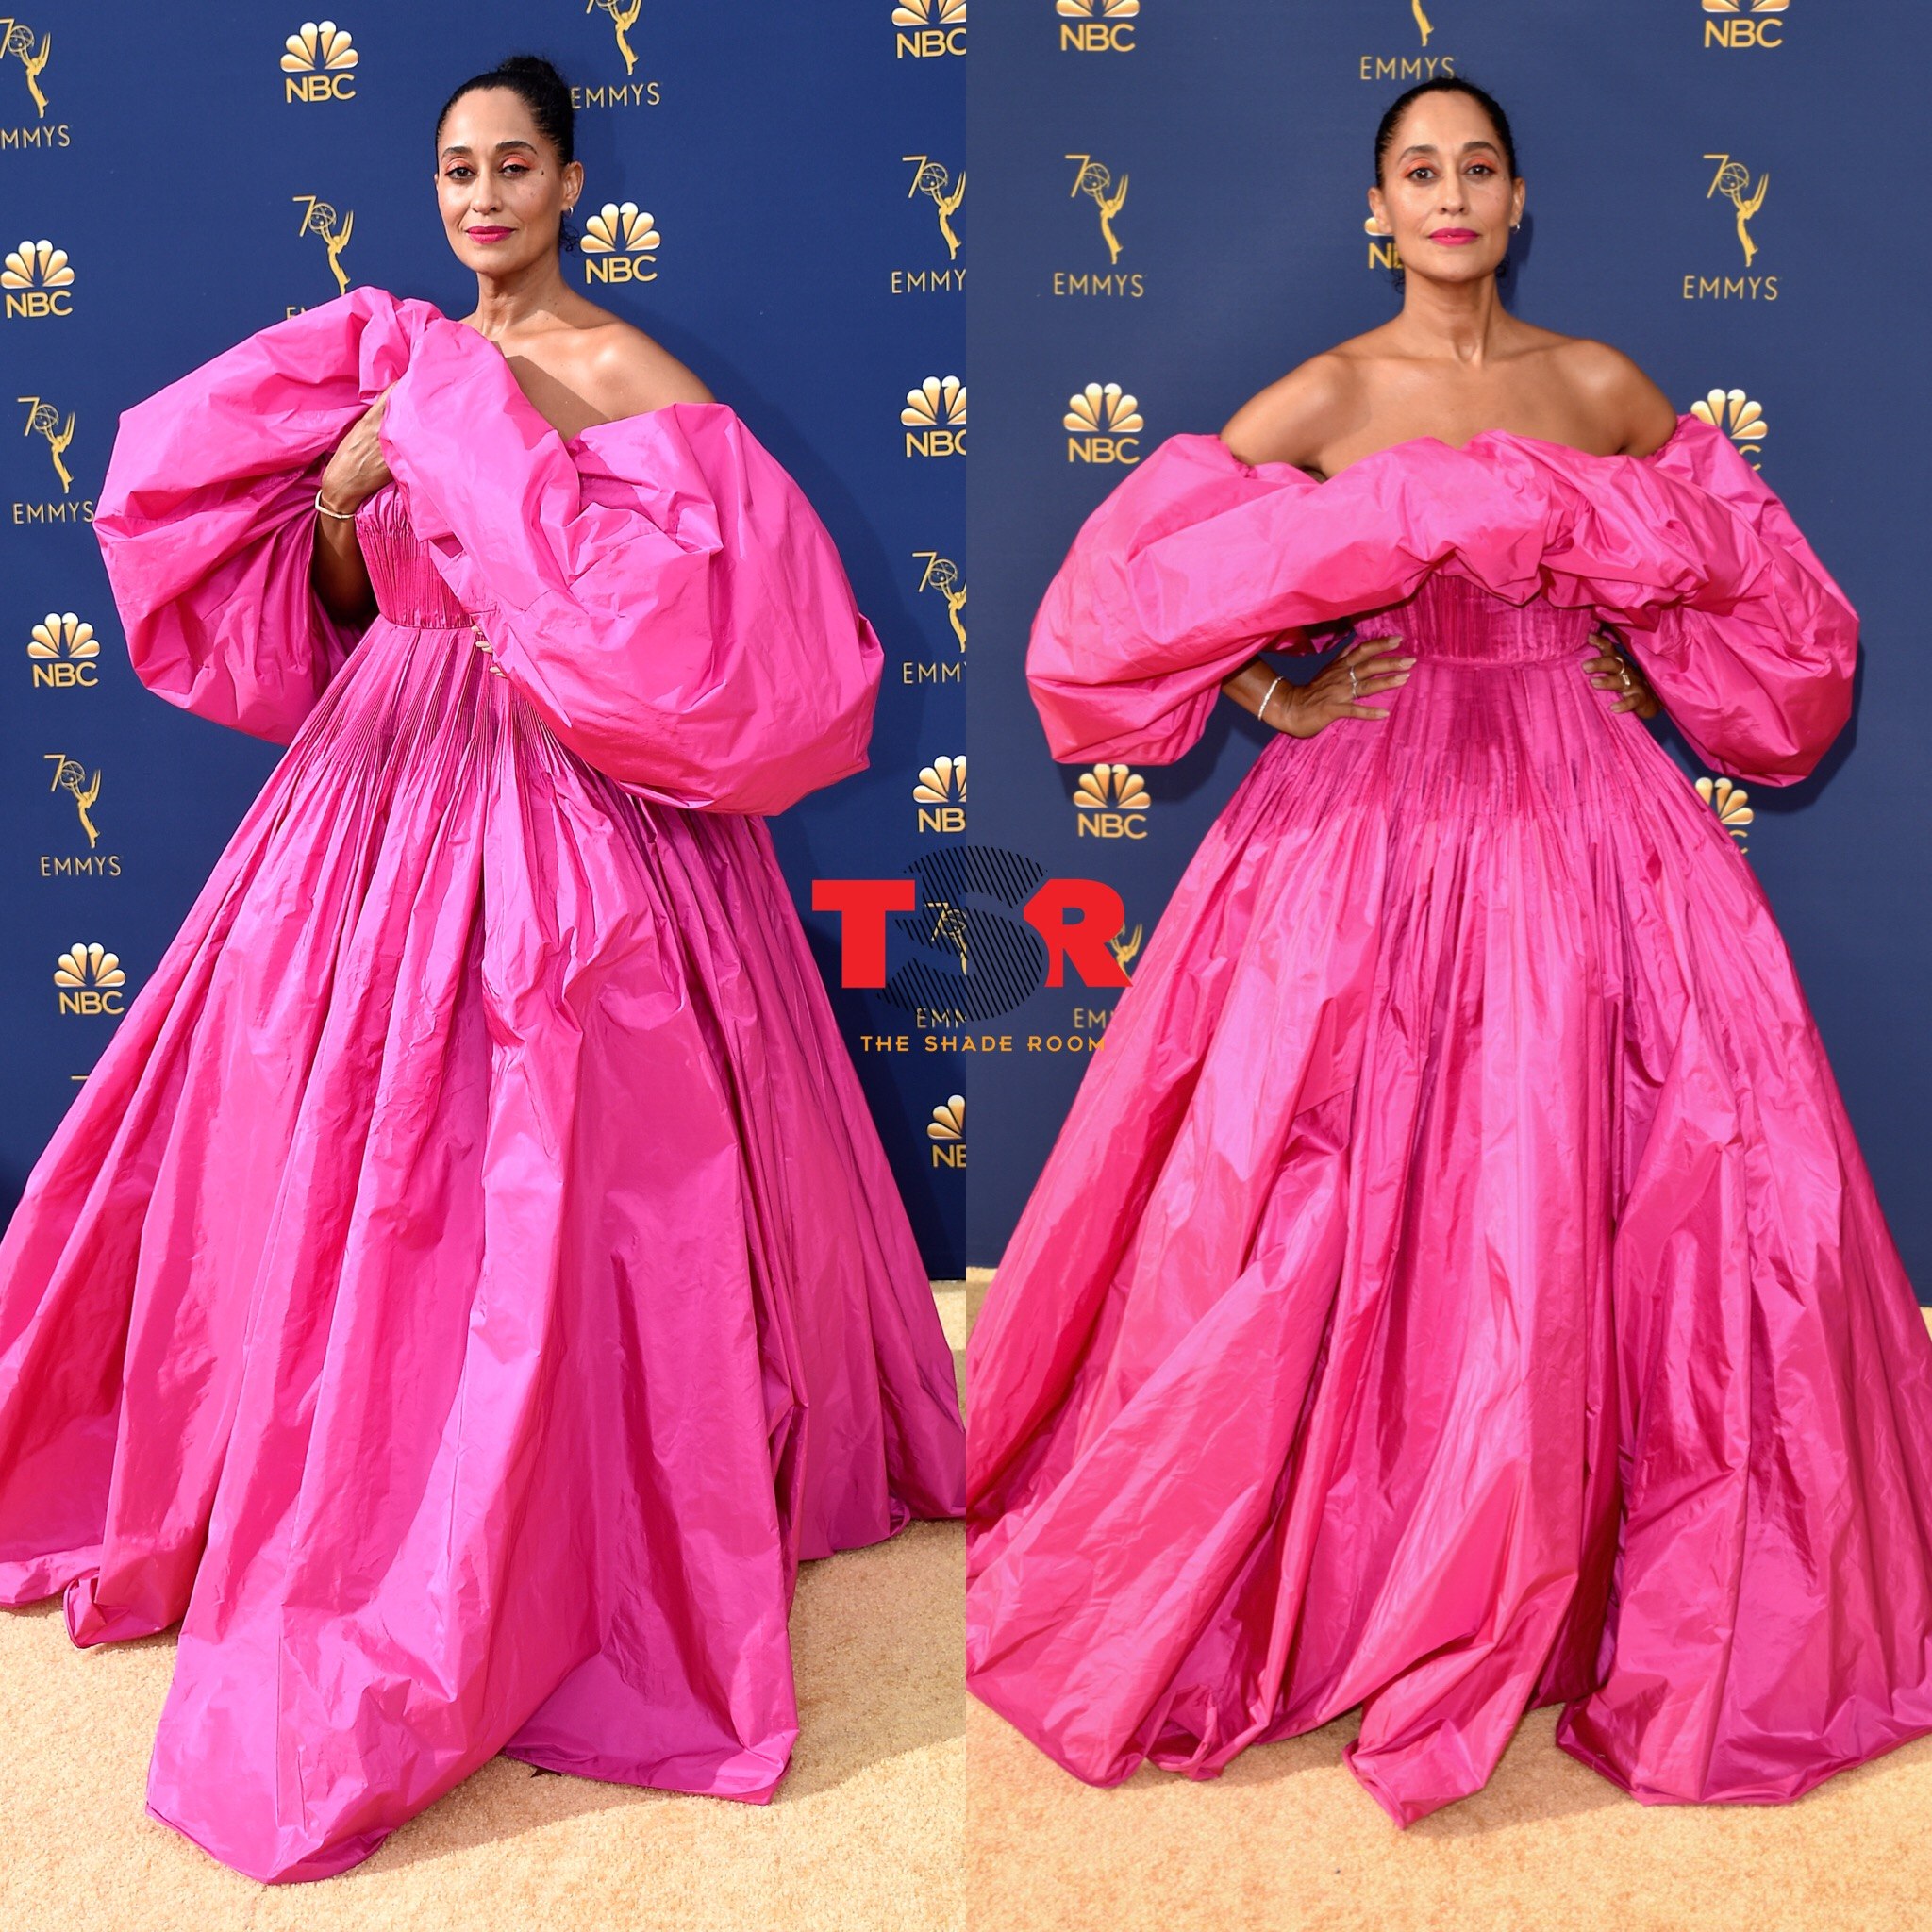 Celebs Step Out And Shut Down The Carpet At The 2018 Emmy Awards - The Shade Room2048 x 2048